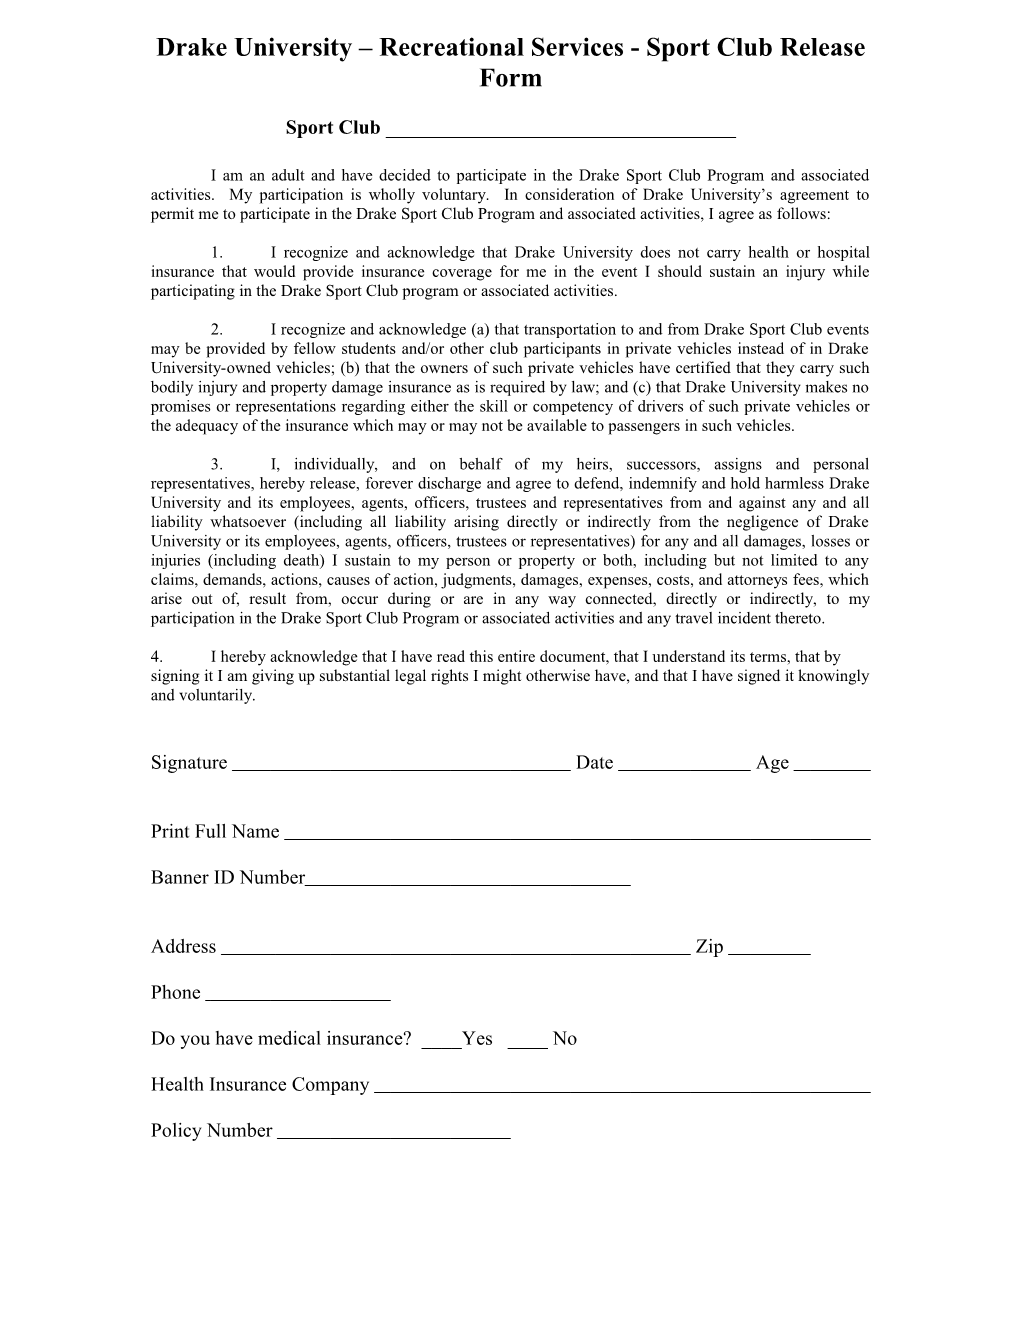 Drake University Recreational Services - Sport Club Release Form